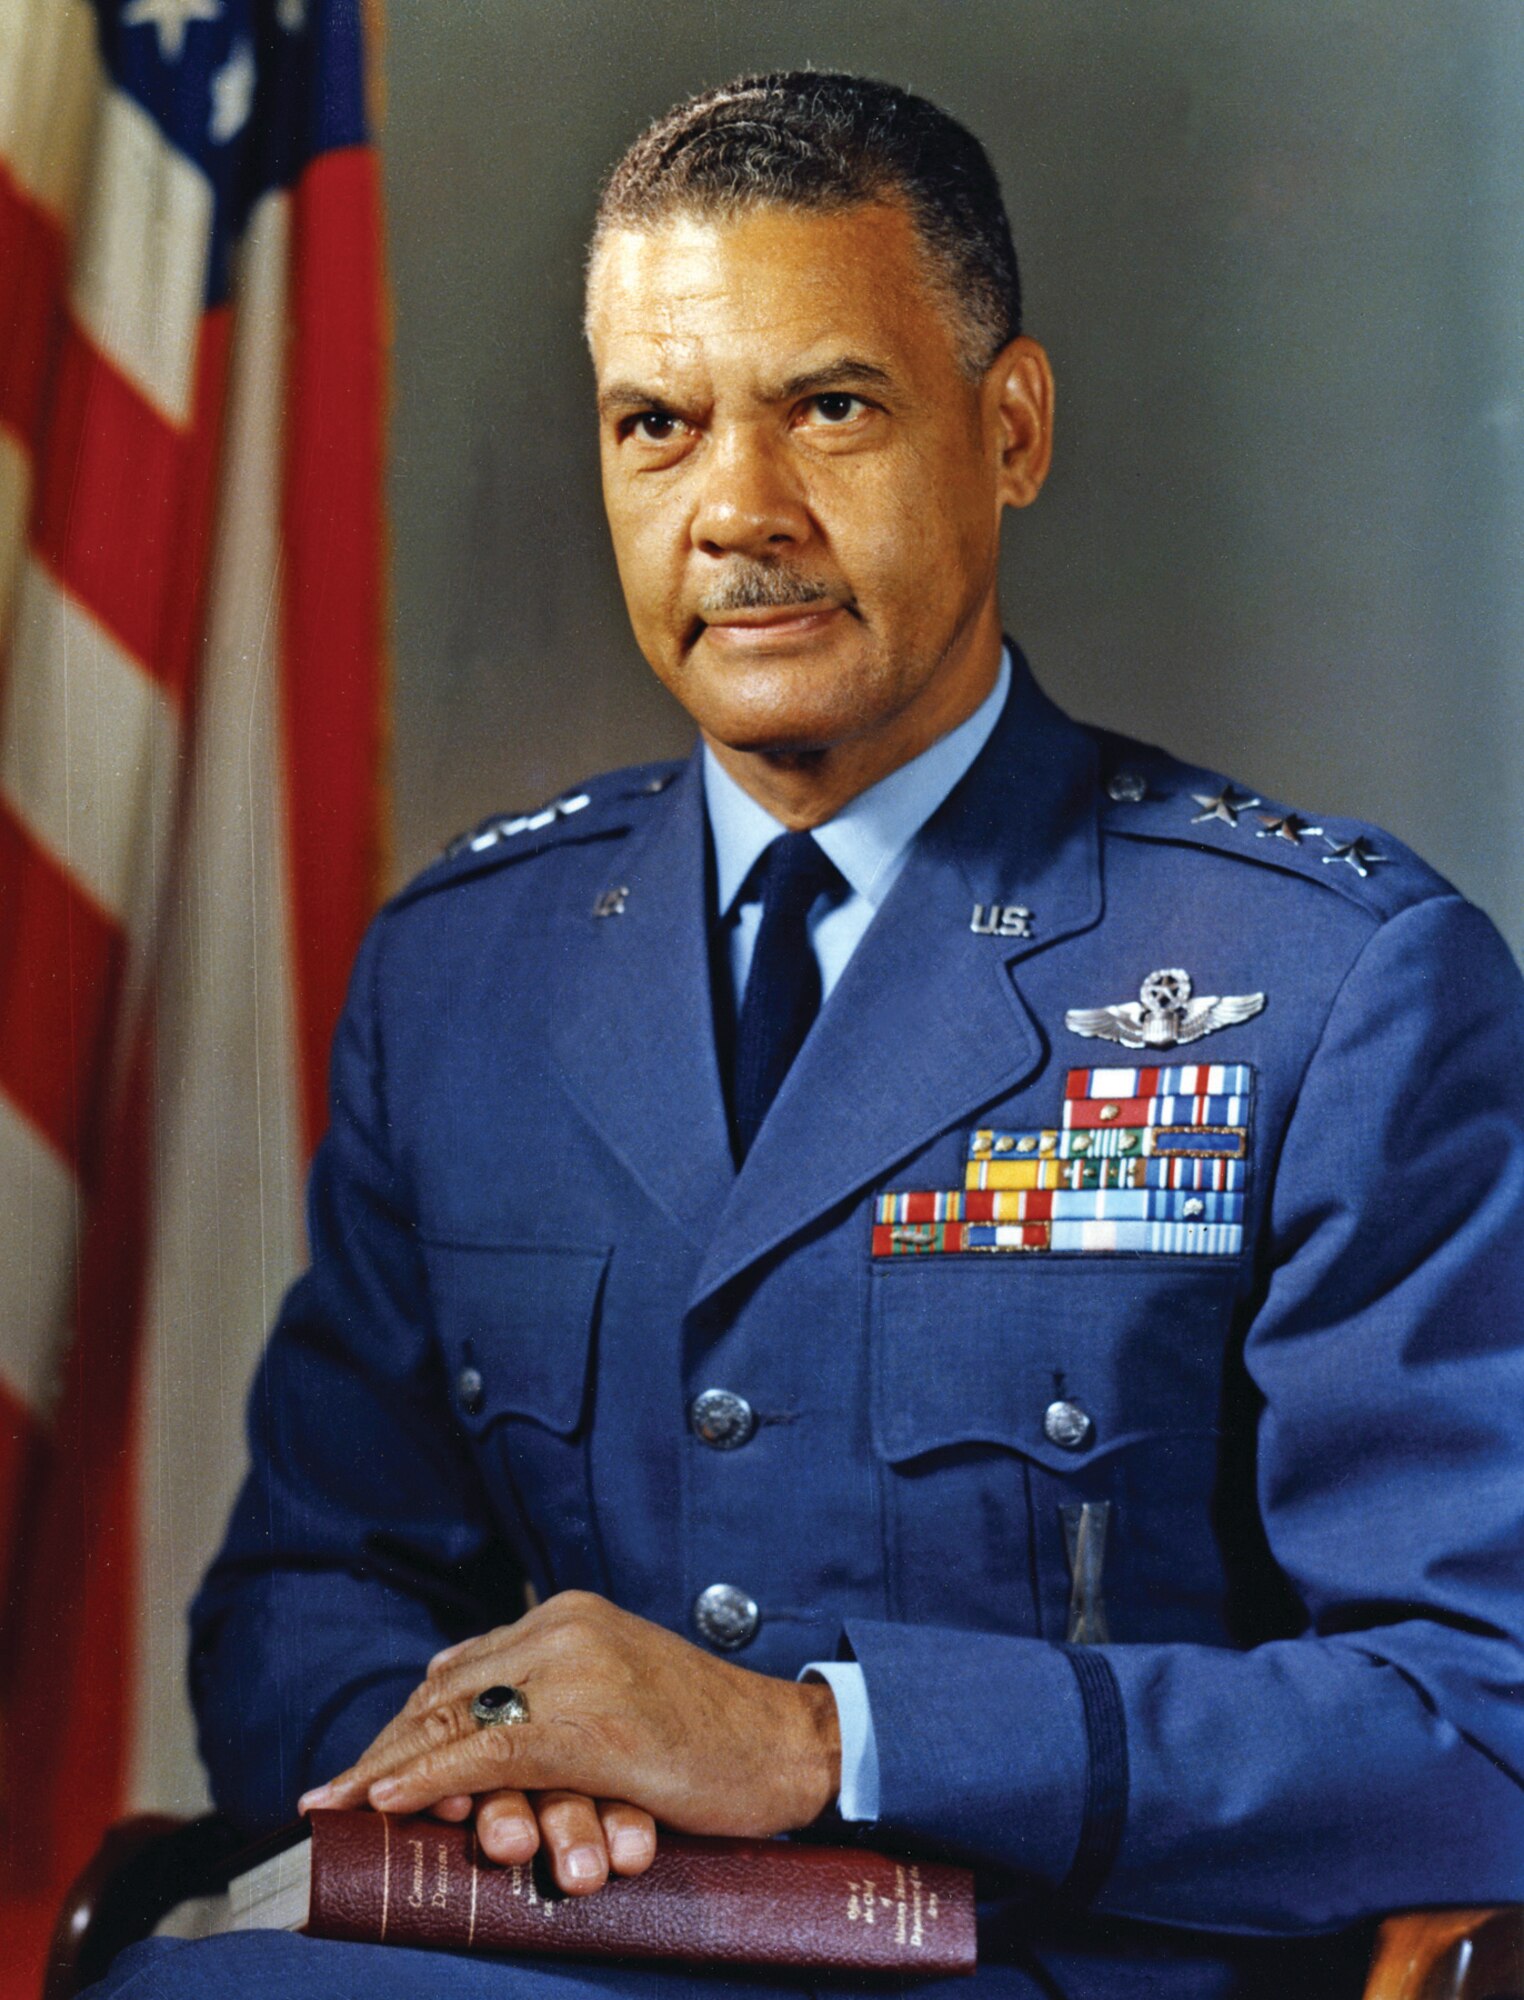 Benjamin Davis was the first African-American officer in the Army Air Forces and was a member of the first African-American pilot-training class at Tuskegee Army Airfield in Alabama. (courtesy photo)